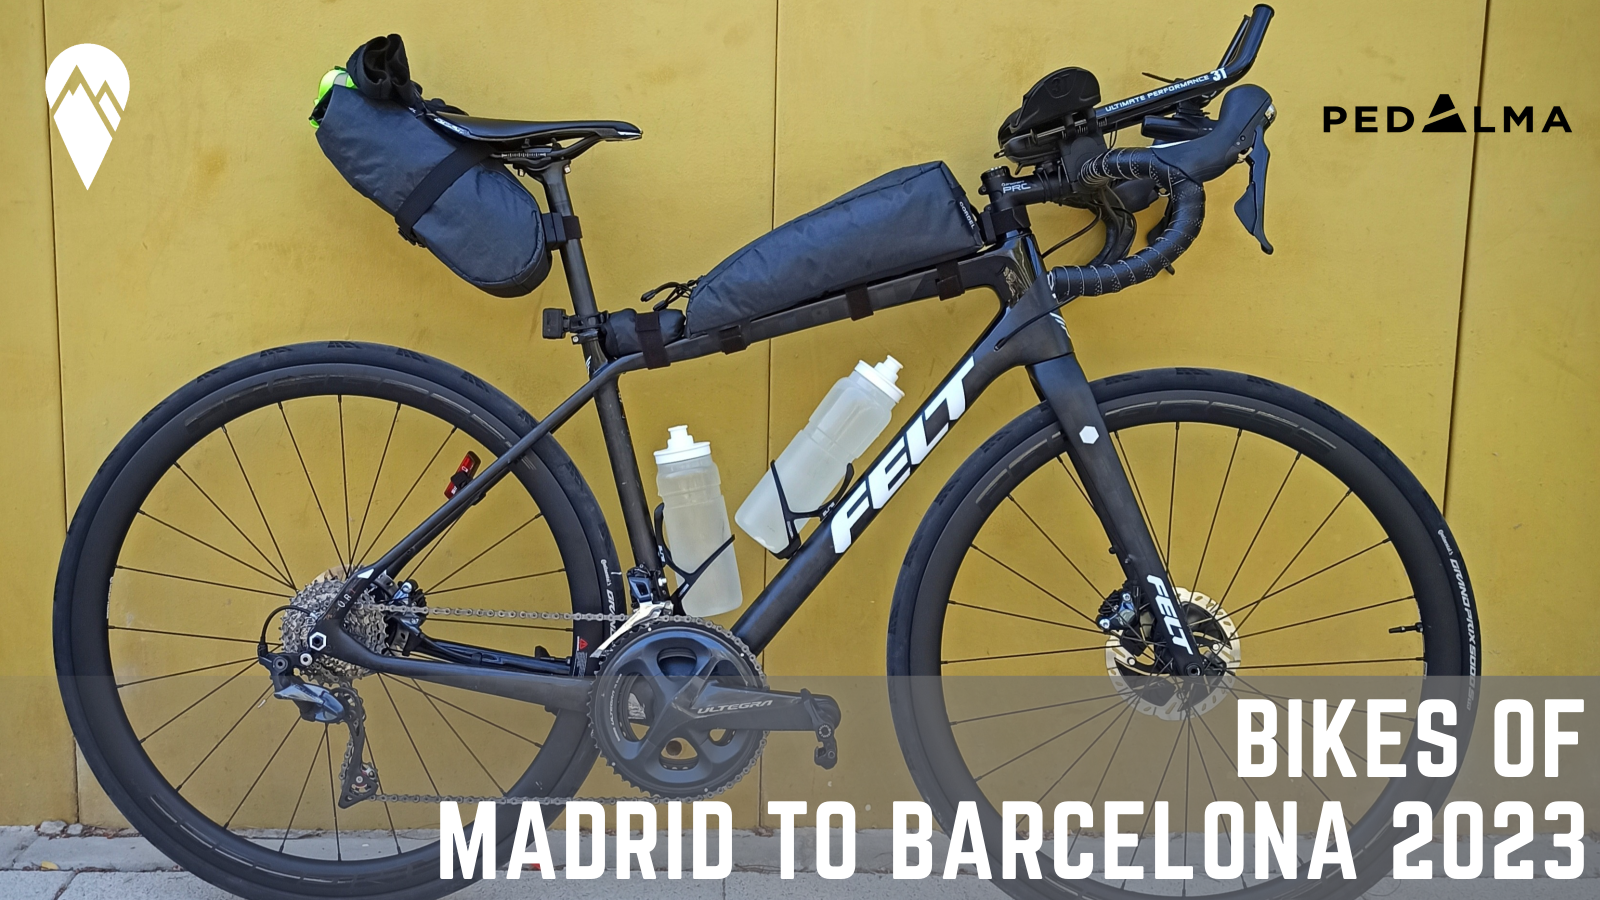 Bikes Of Madrid To Barcelona by PedAlma 2023